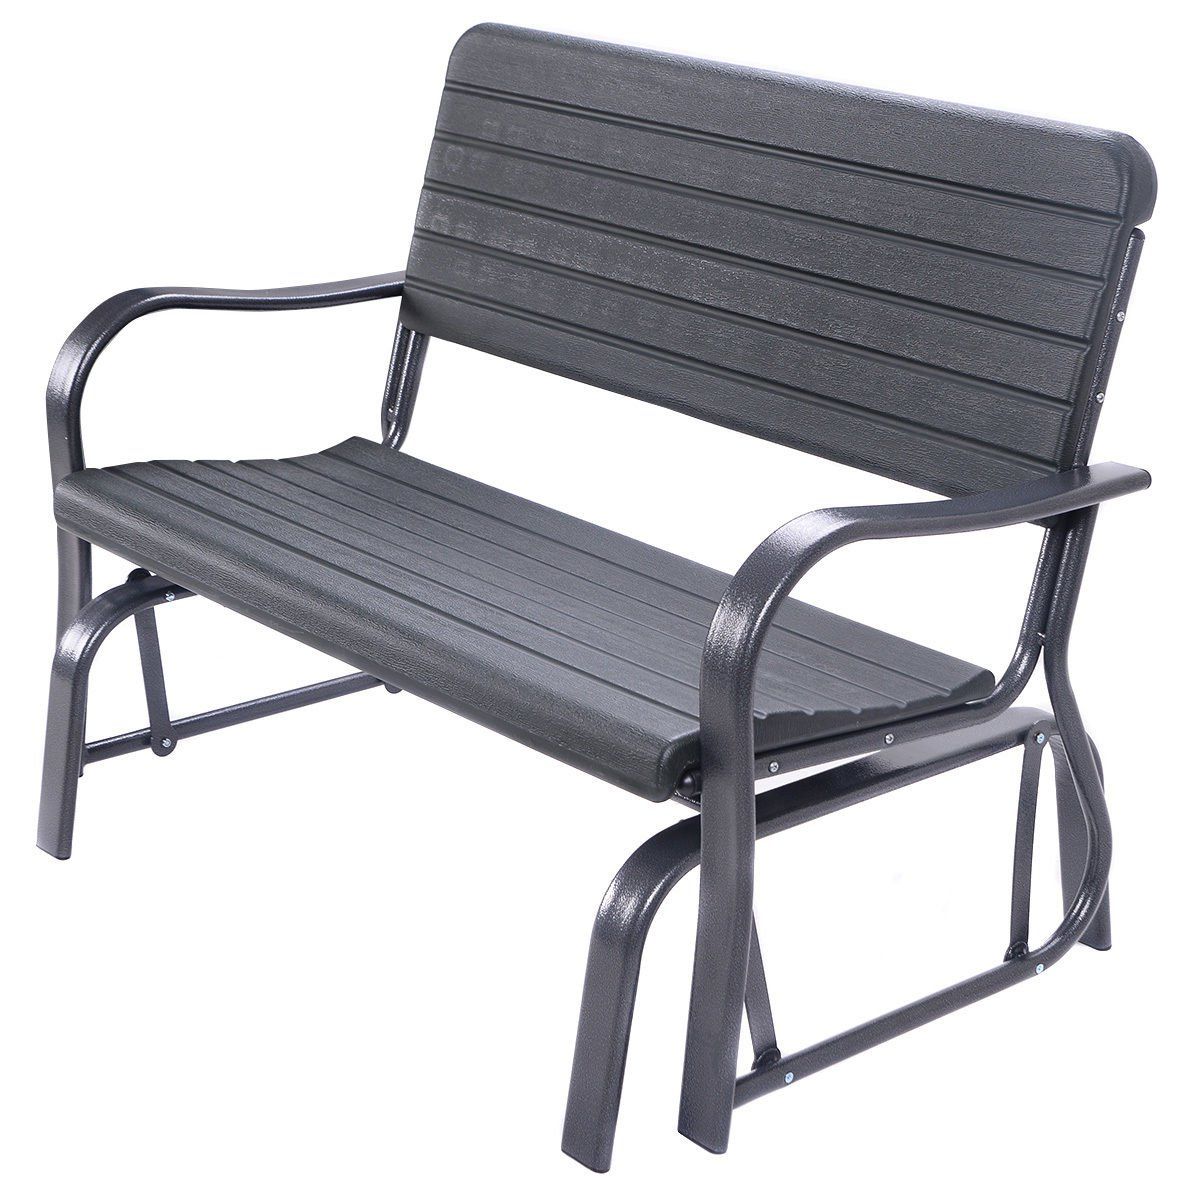 Amazon : Nature Republic Outdoor Patio Swing Porch Intended For Recent Outdoor Steel Patio Swing Glider Benches (View 1 of 30)